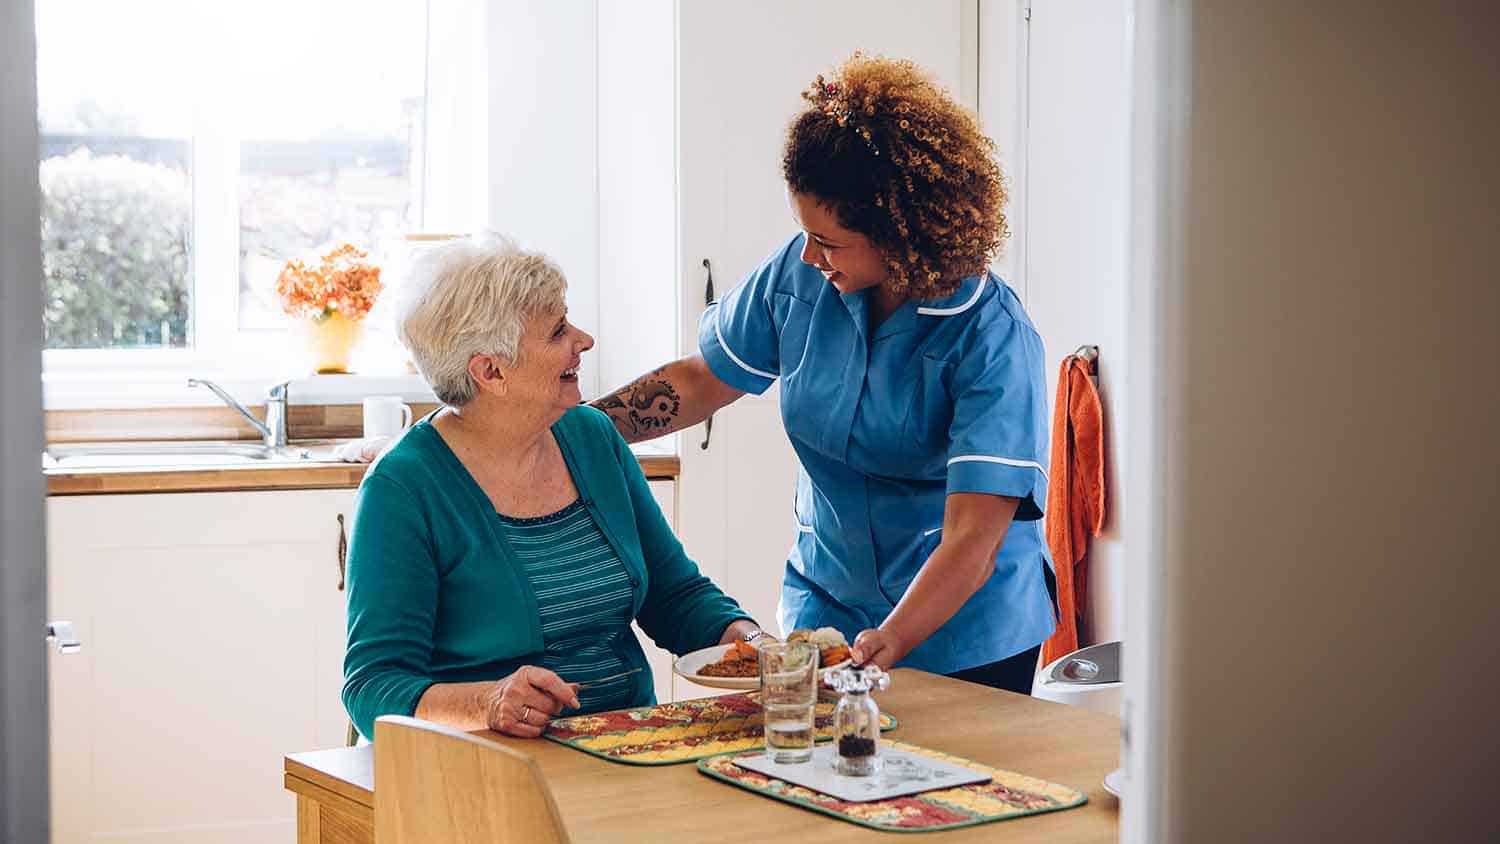 A carer helps an older lady with her meal, they're smiling at each other